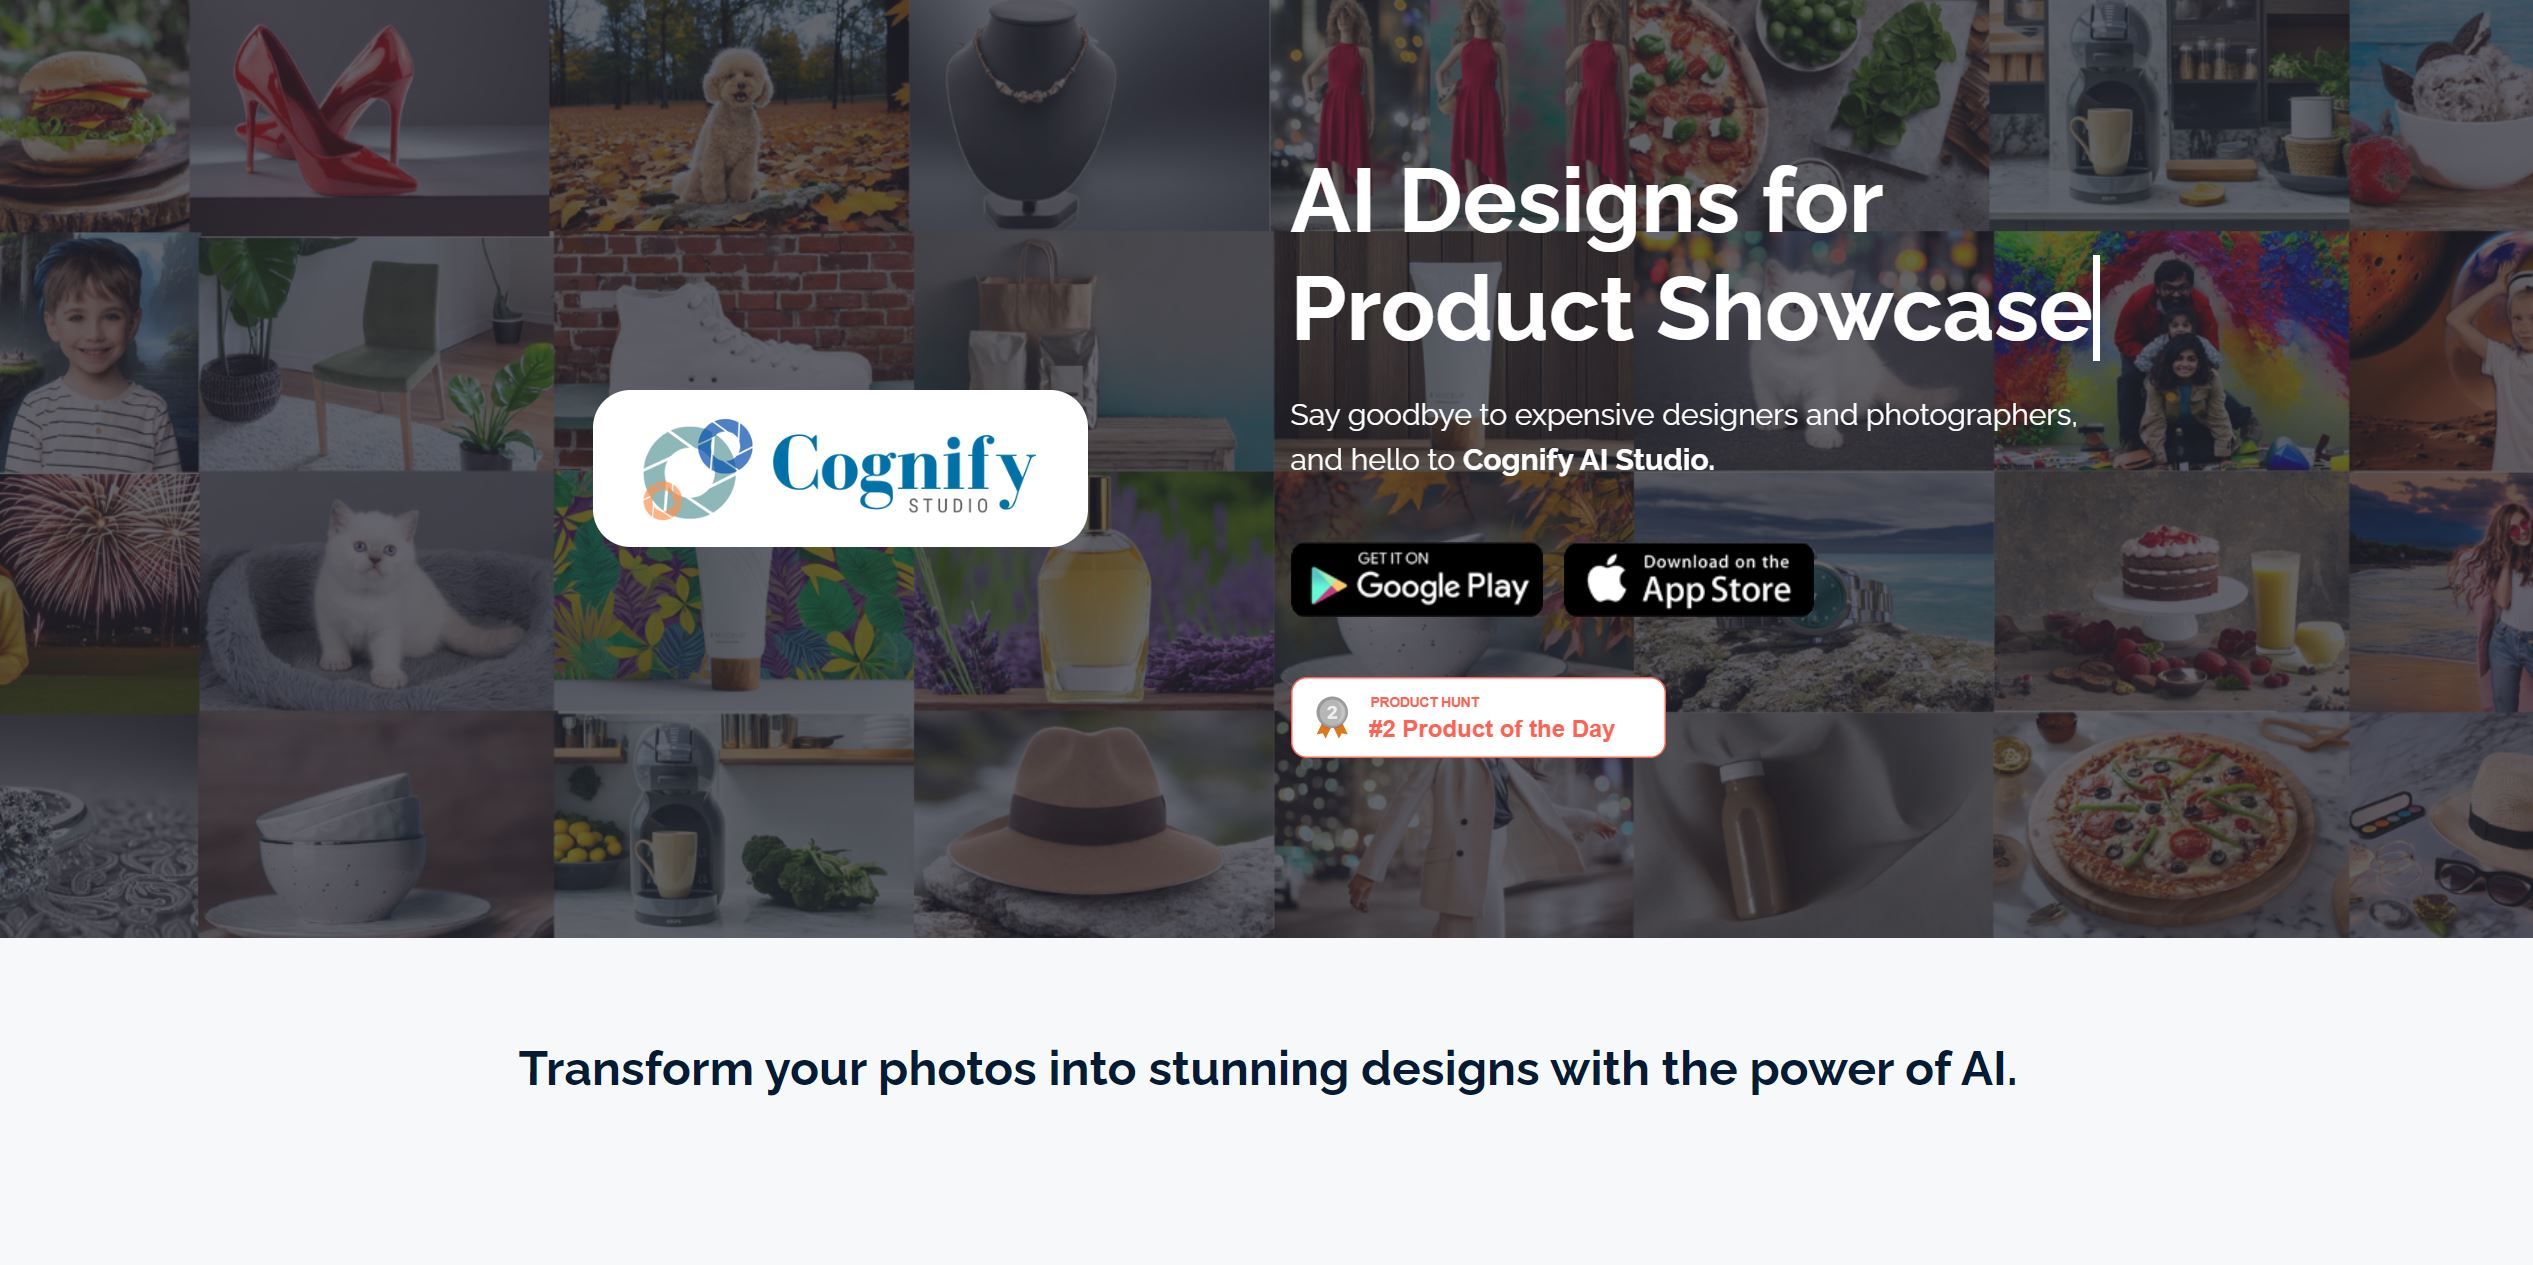 Cognify StudioAI app transforms photos into stunning showcases for products